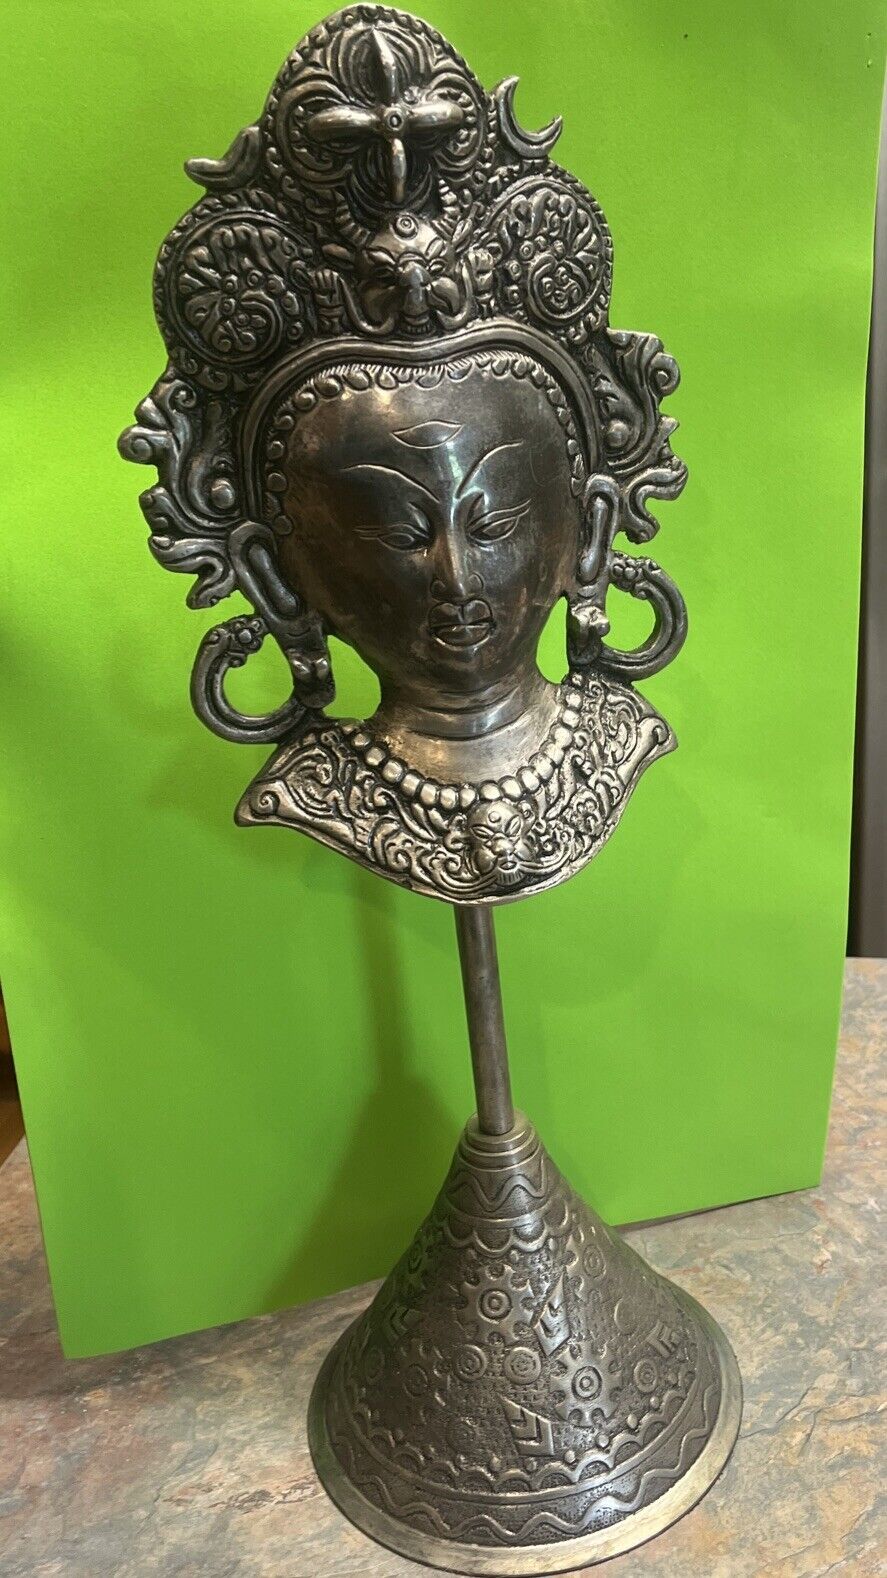 Rare Large Cast Metal Female Hindu Deity Bust On Stand With Decorative Base